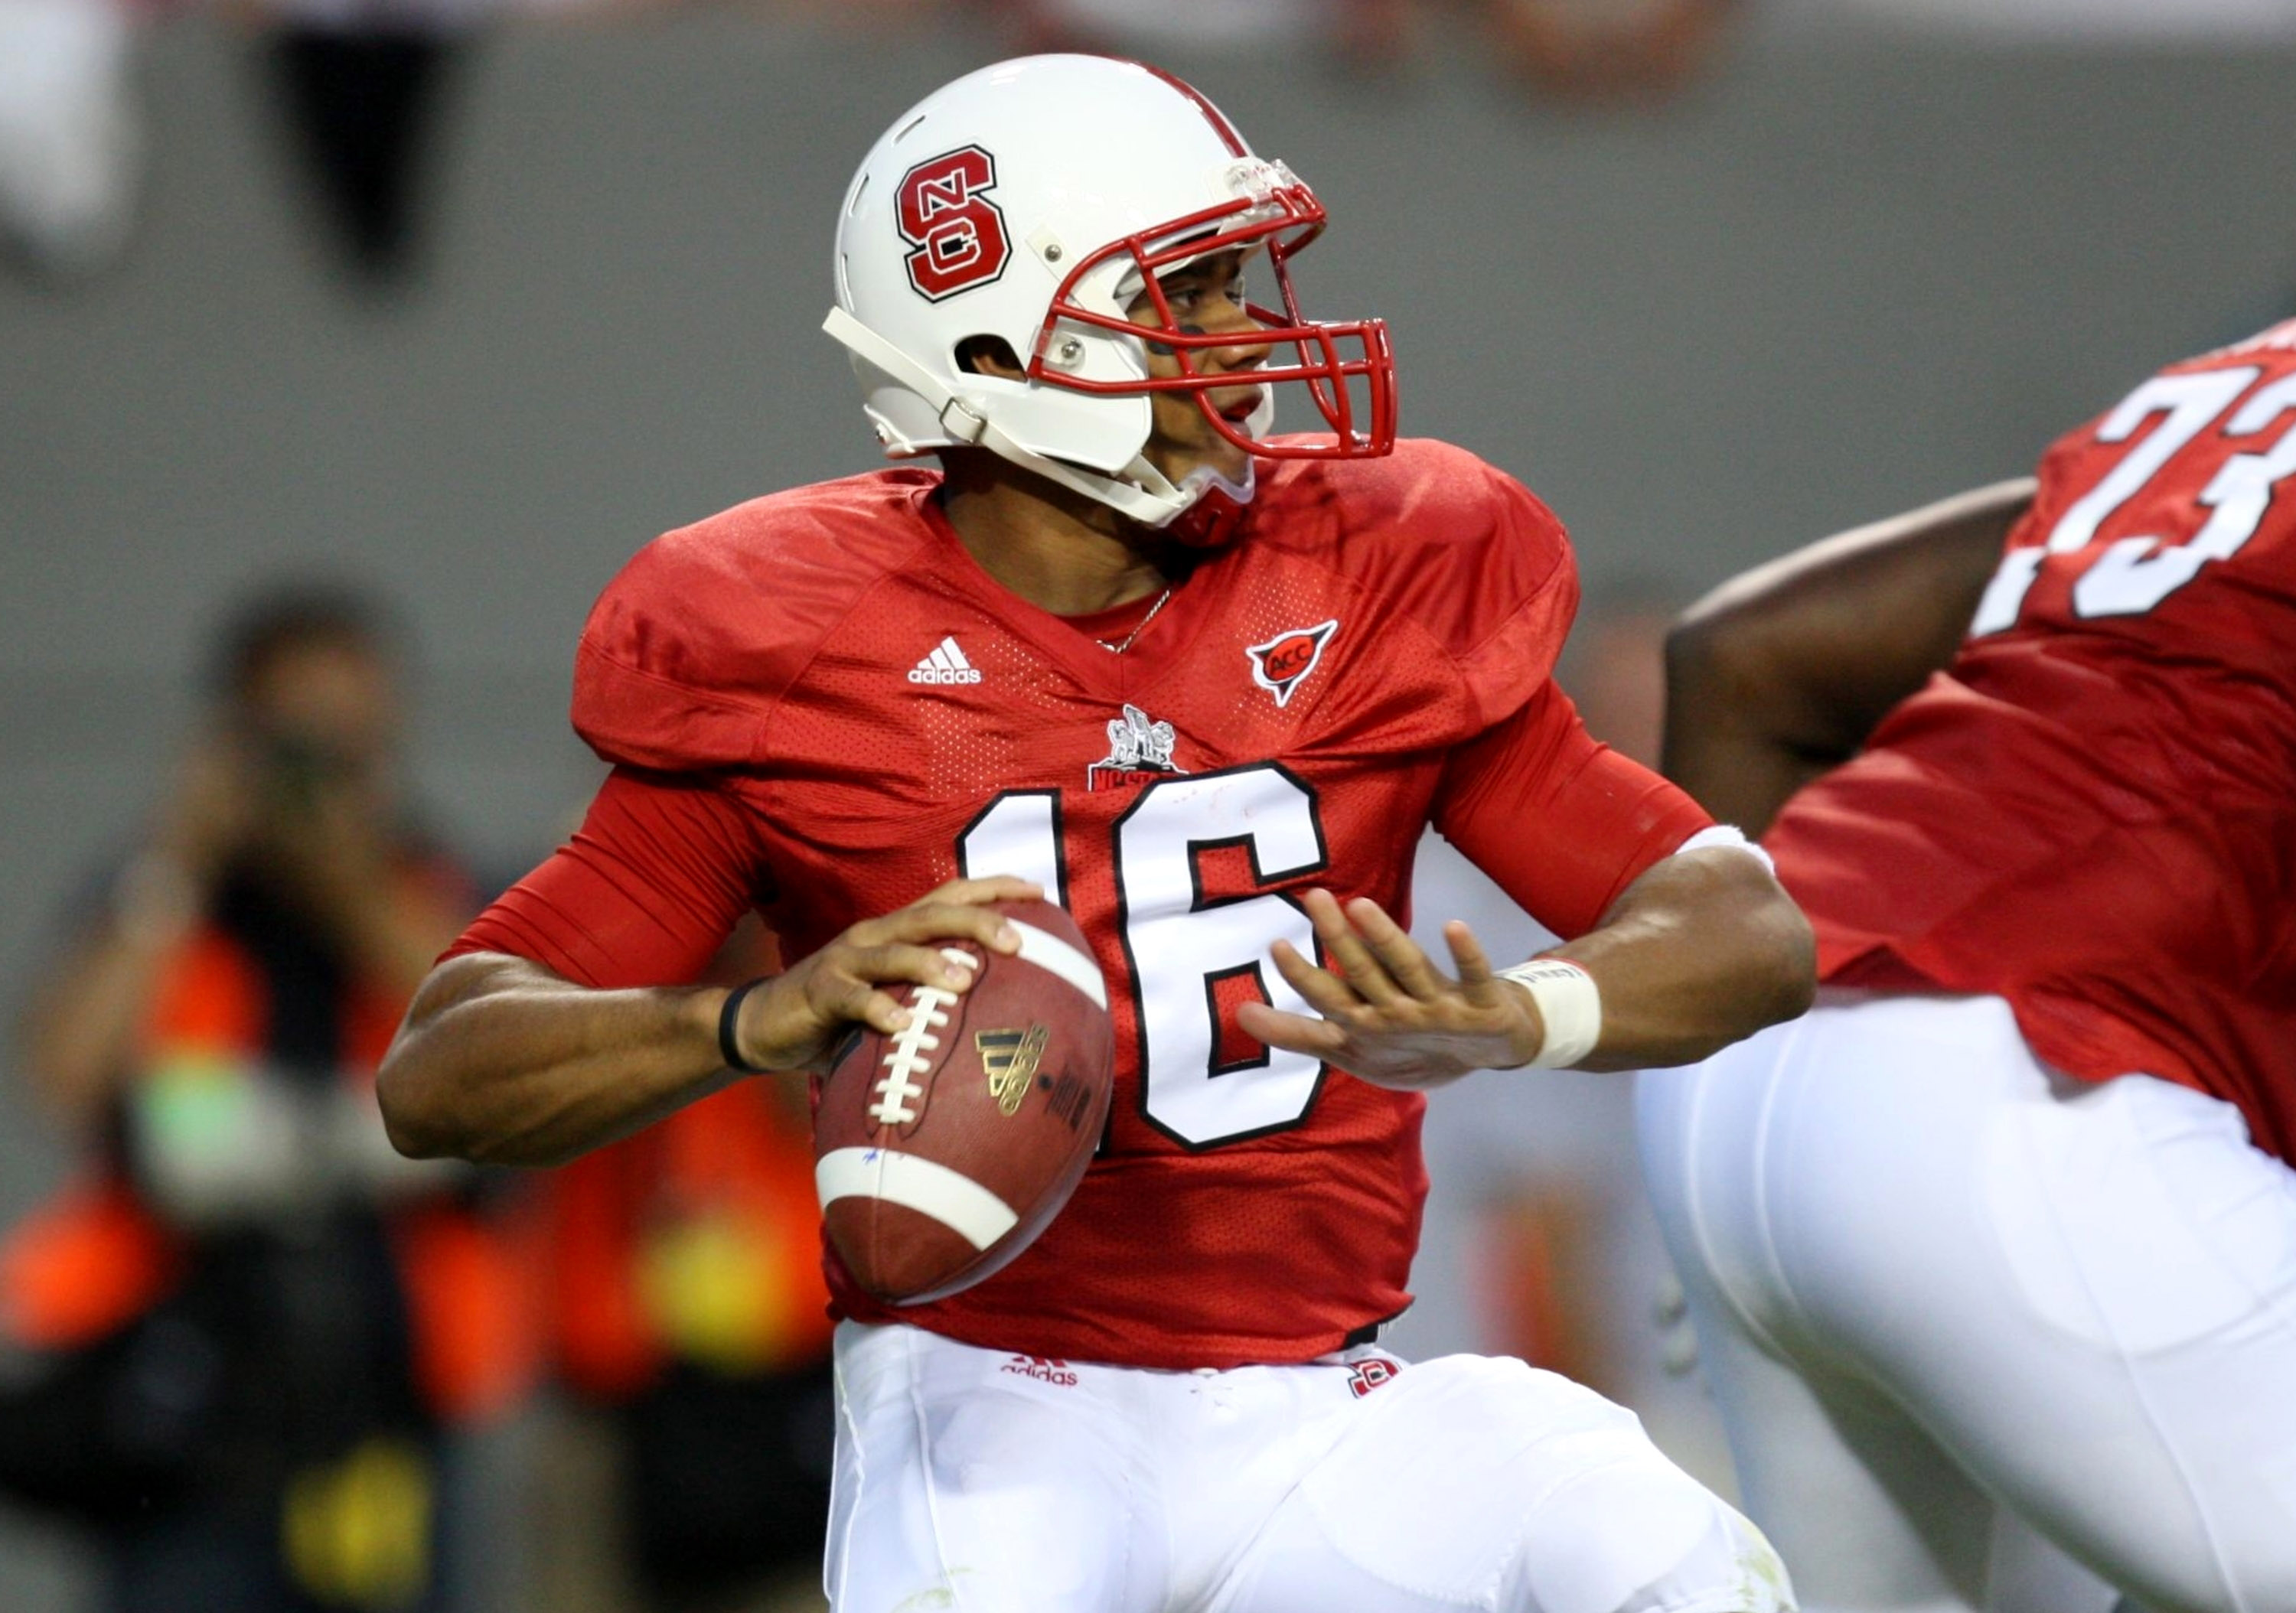 russell wilson nc state jersey